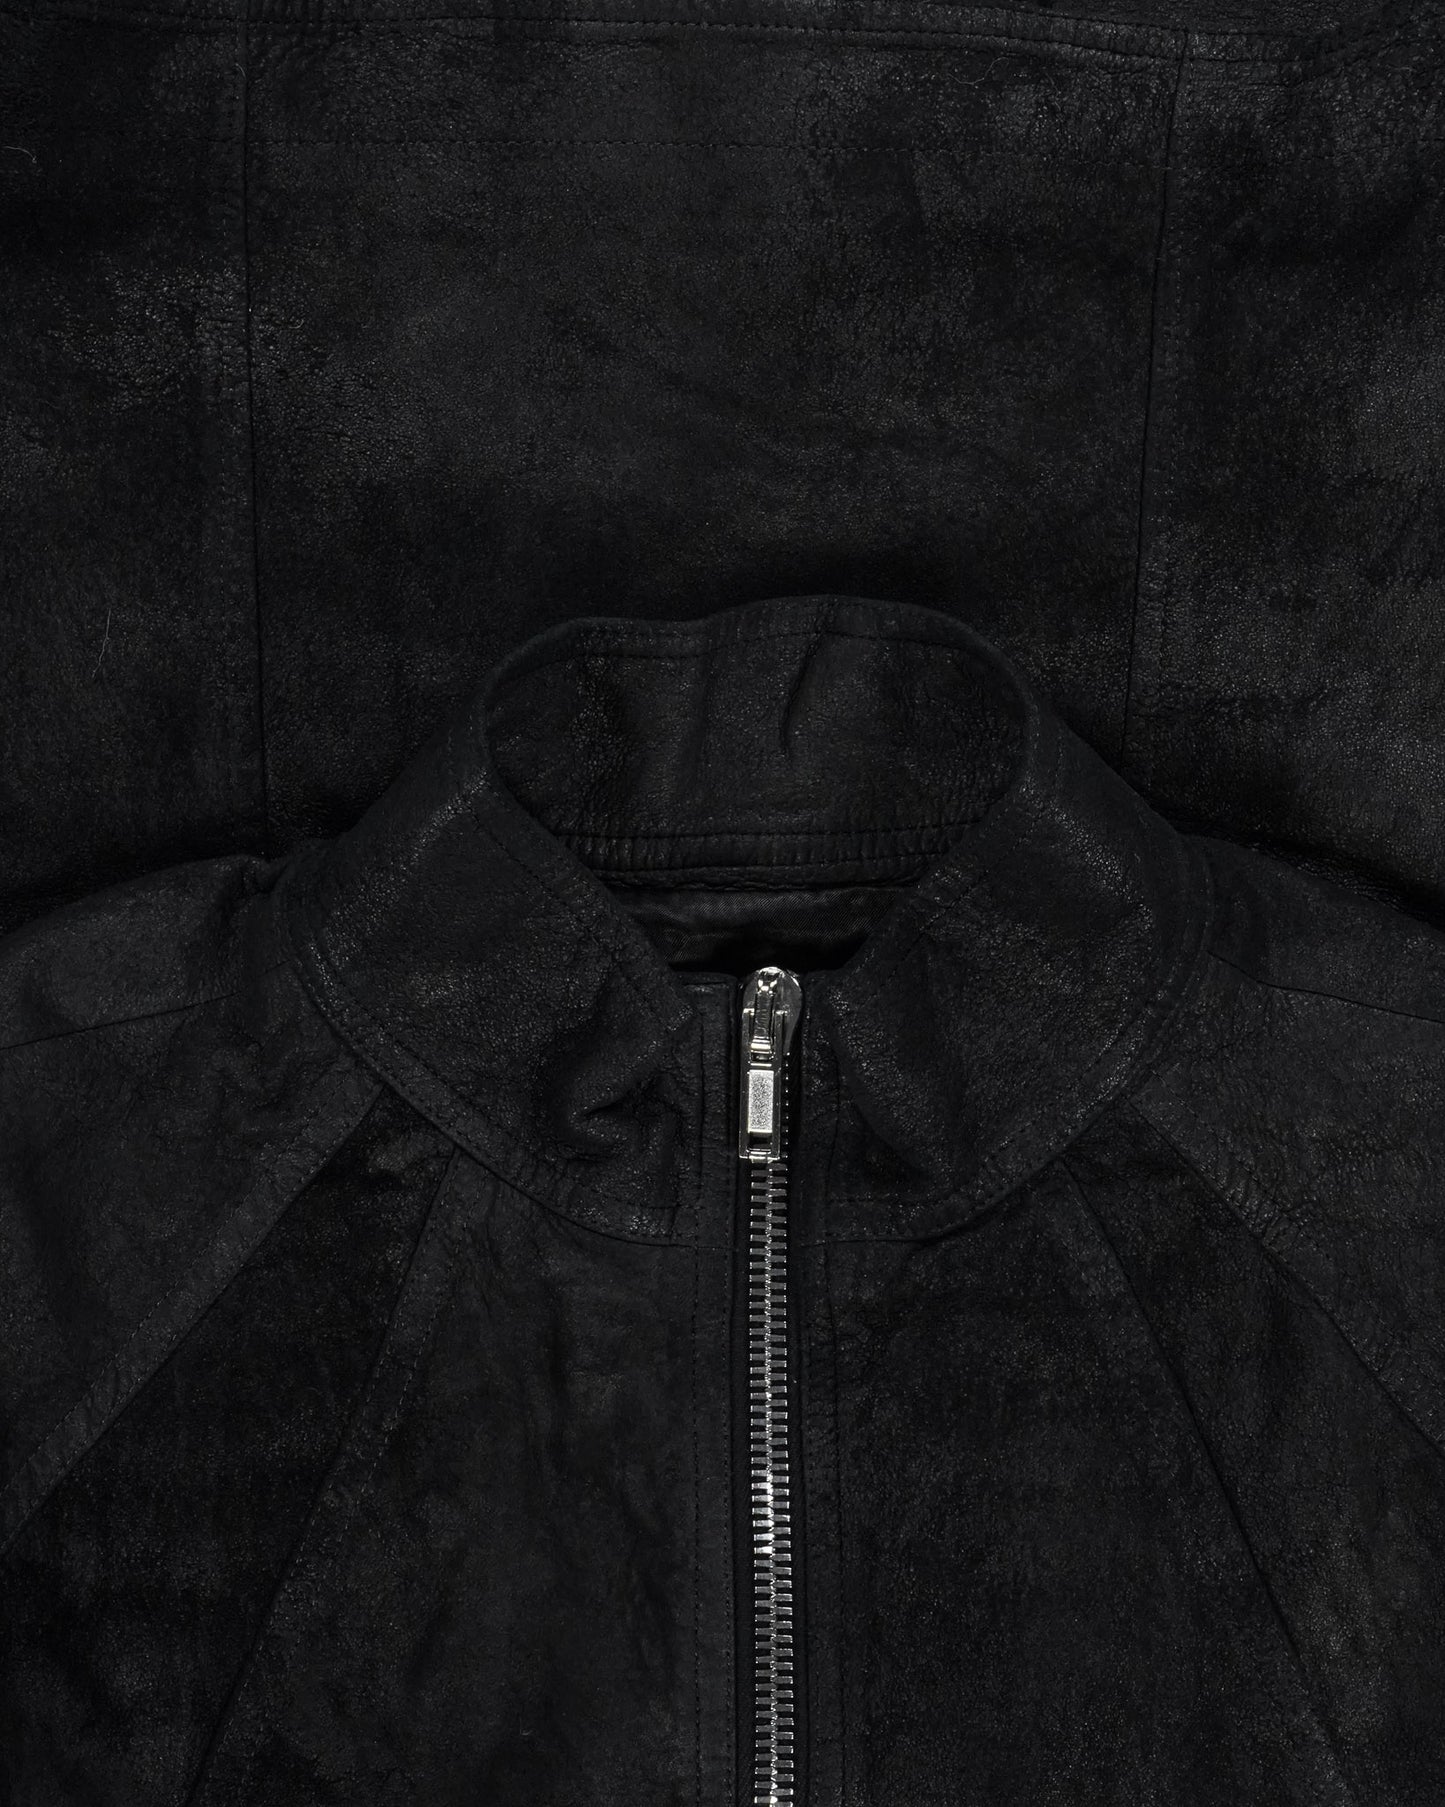 Rick Owens “Blistered” Leather Jacket - SS08 